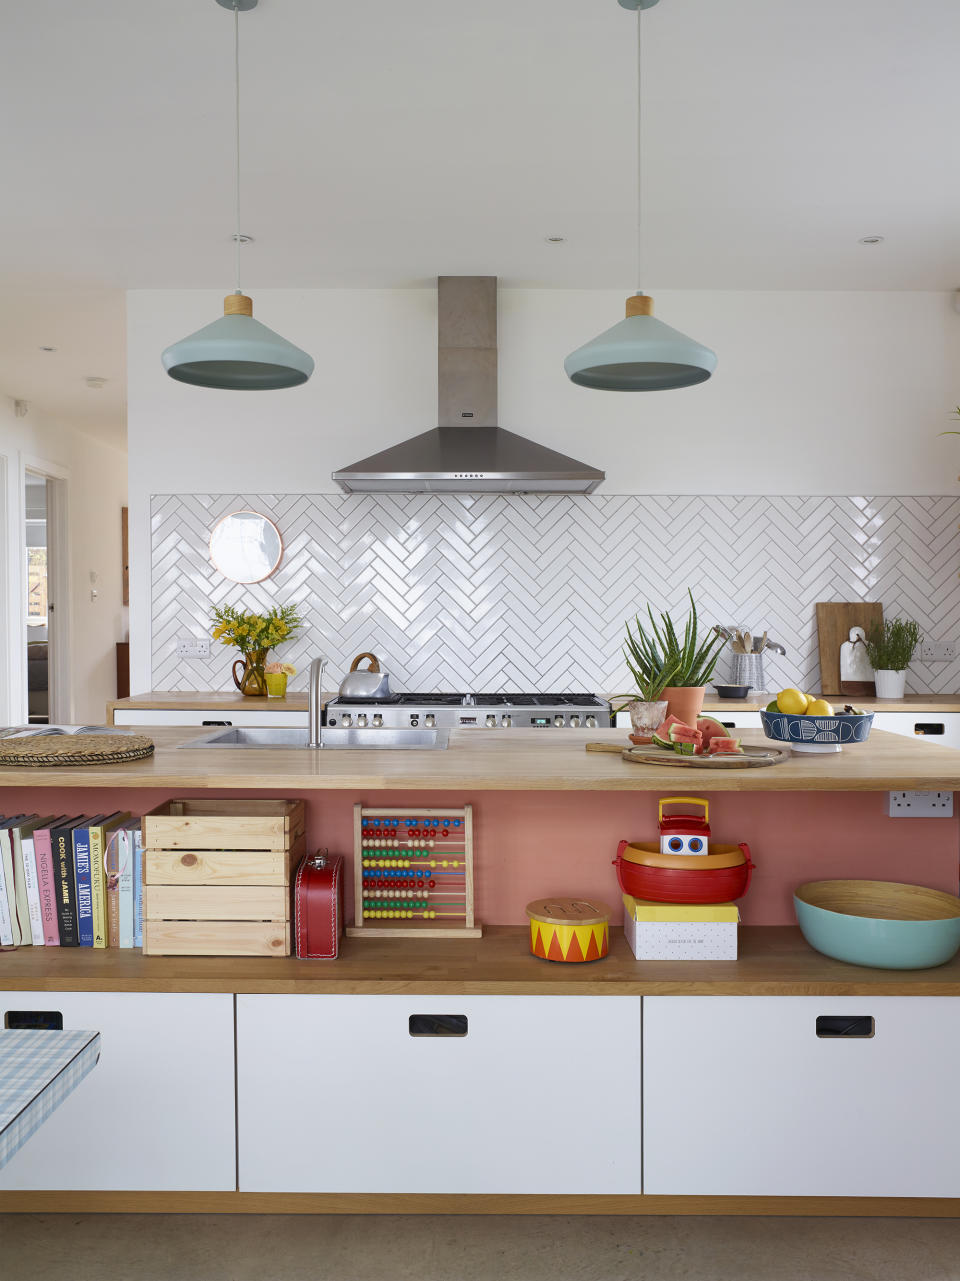 <p> Homeowner Rhiannon Payne used her kitchen island as an opportunity to introduce color to an otherwise neutral kitchen &#x2013; and pairing the splash of pink with the natural tones and texture of plywood makes for a subtle take on a bolder scheme. </p>